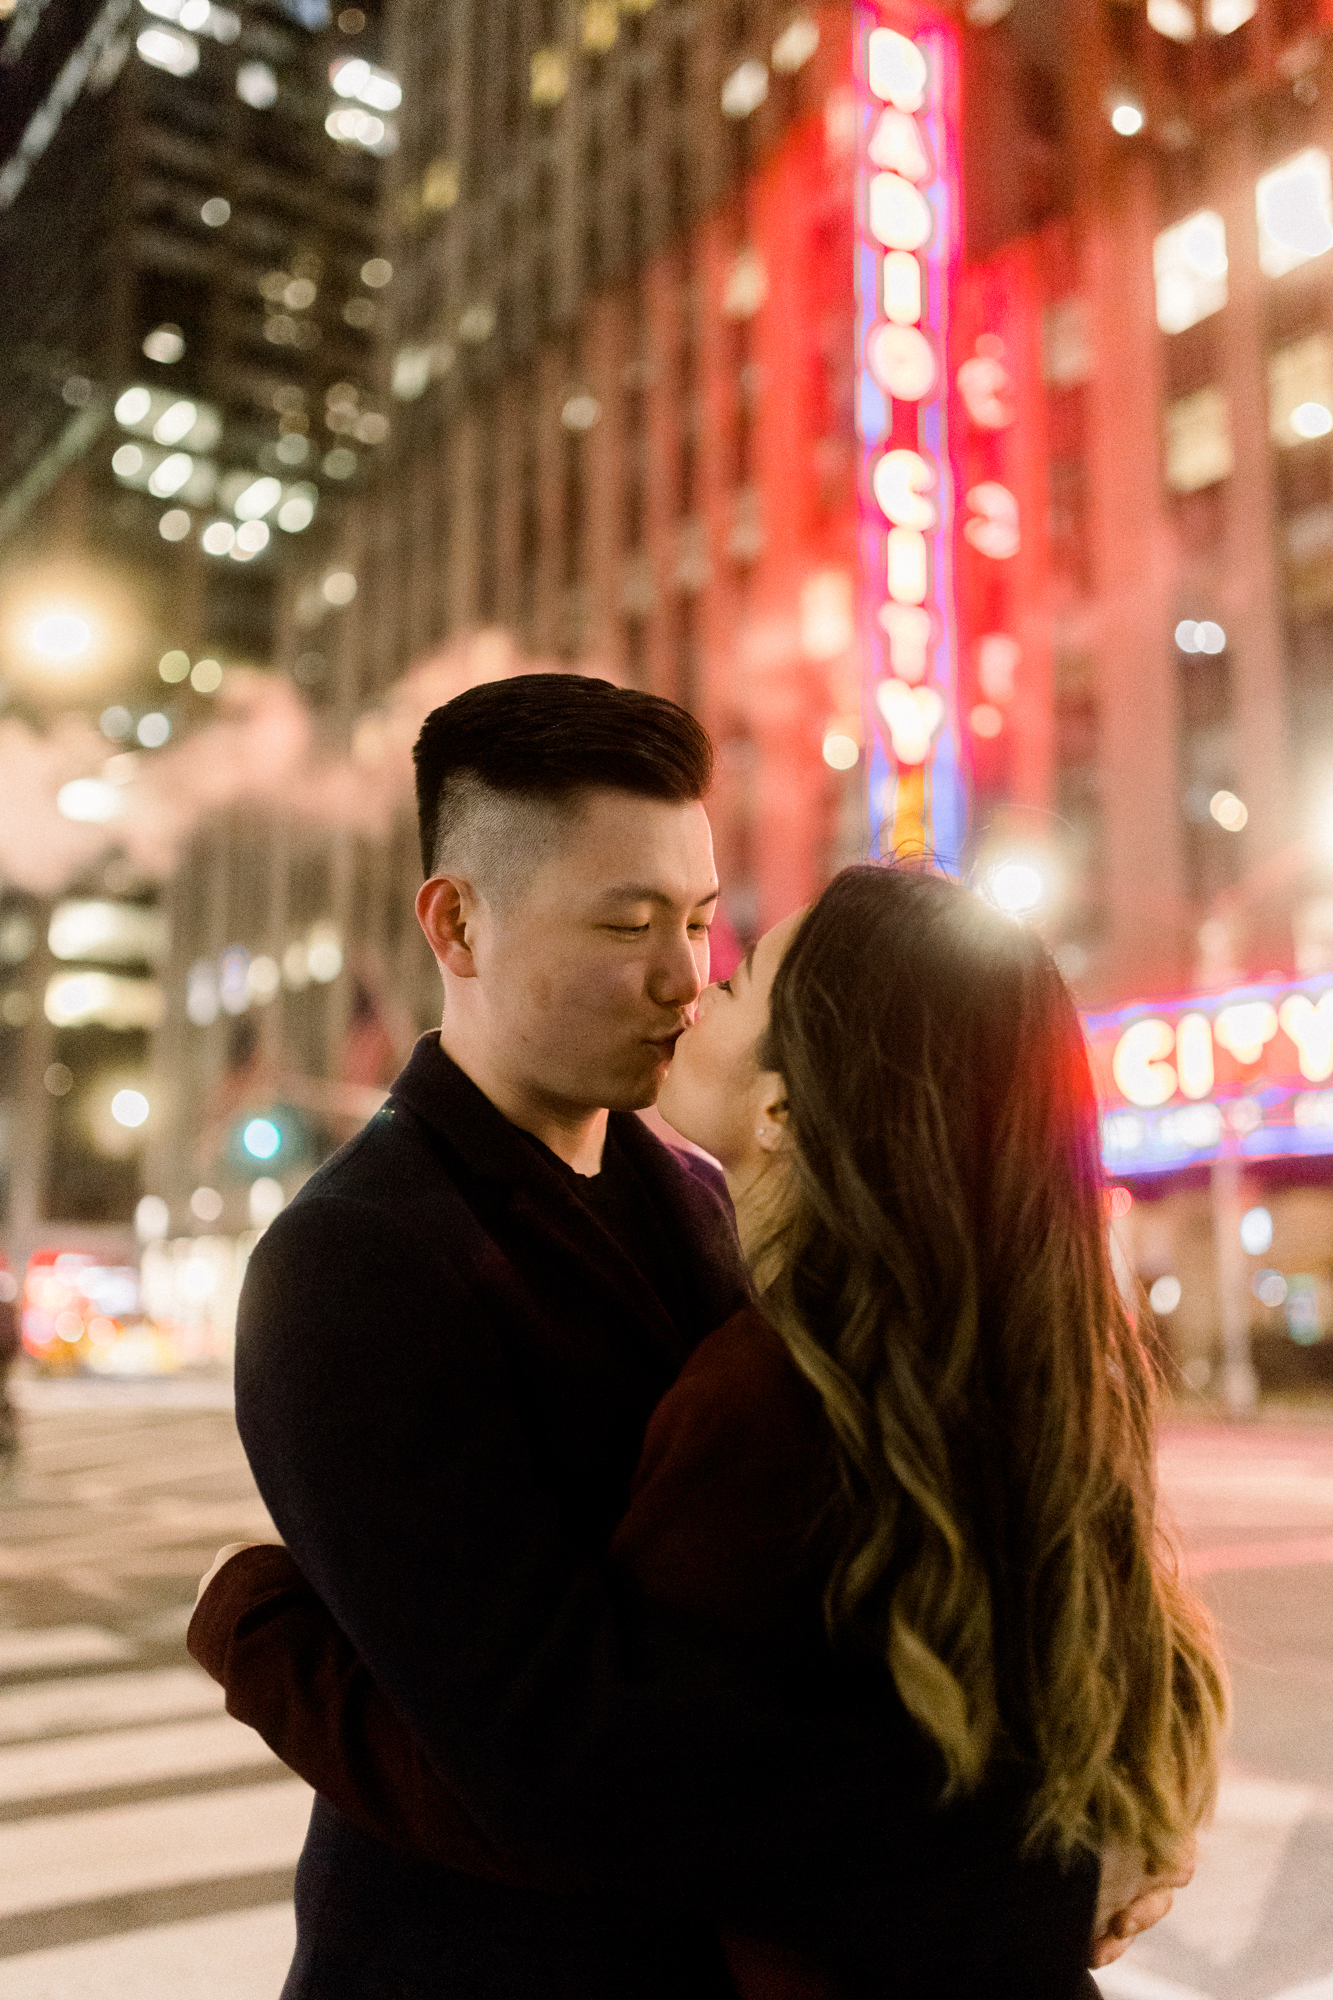 Stunning Nighttime Winter Engagement Photos in New York's Iconic Times Square